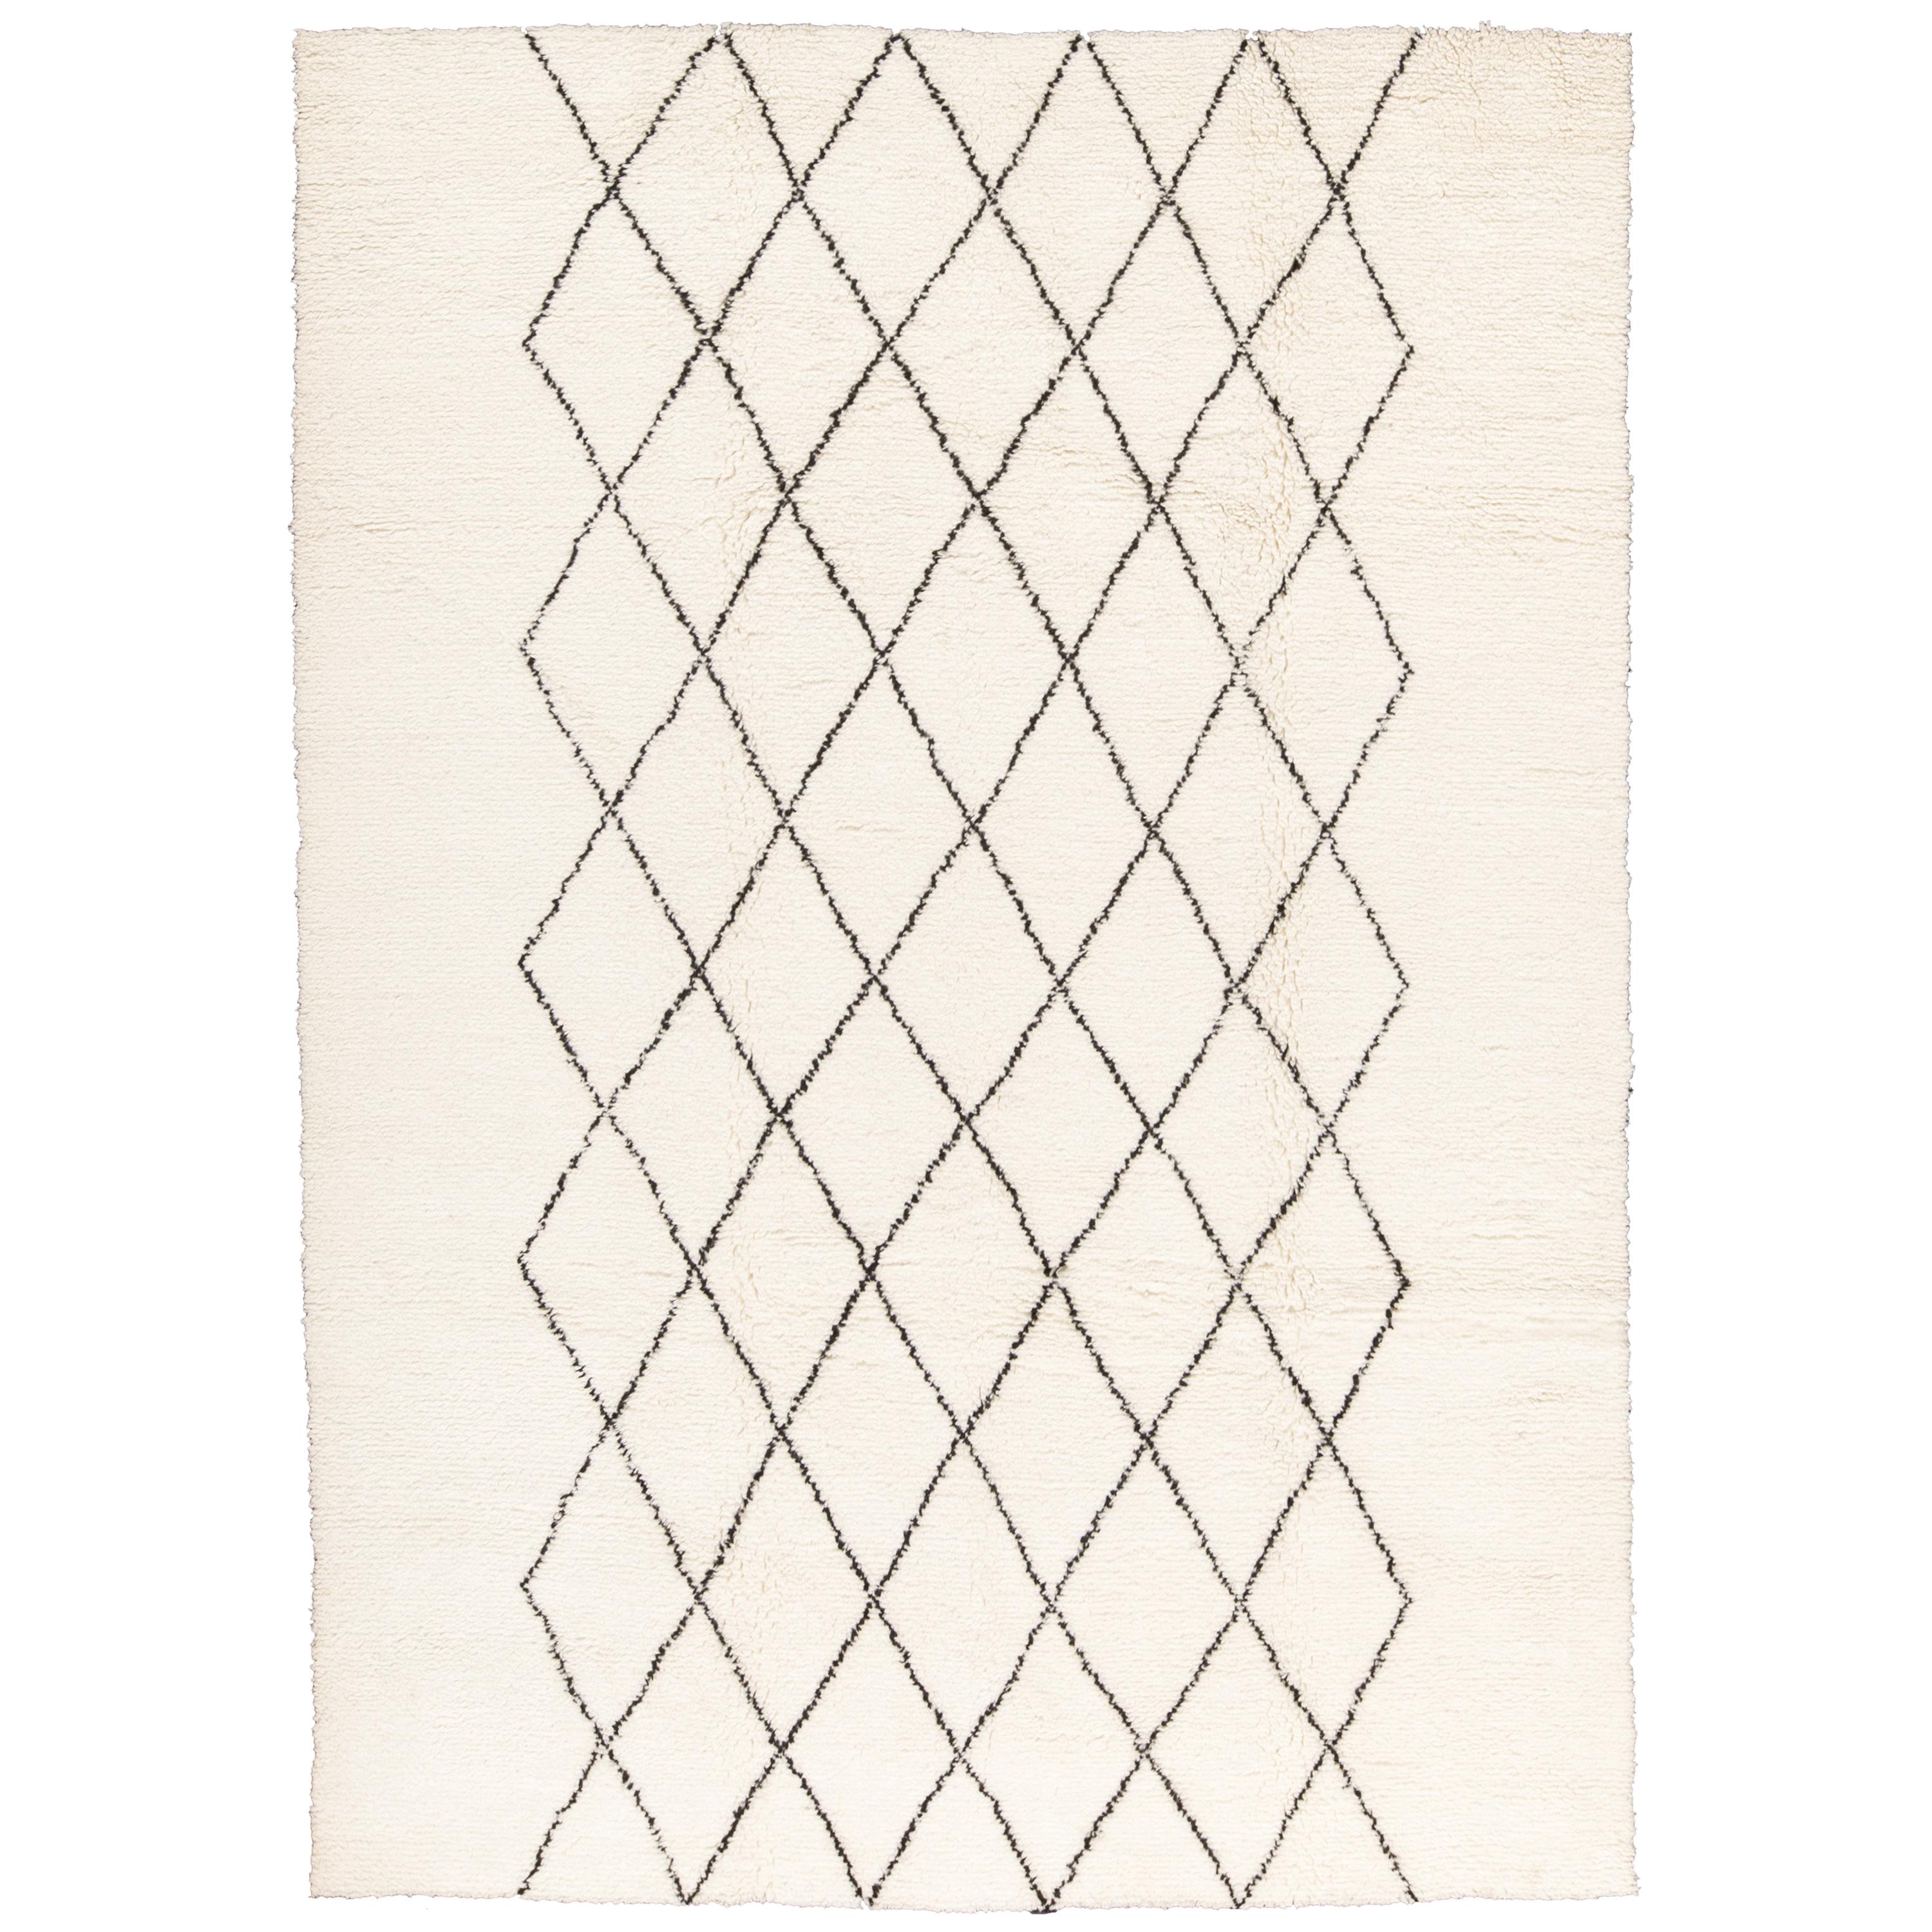 Contemporary Moroccan Style Ivory and Black Wool Rug with Diamond Pattern For Sale